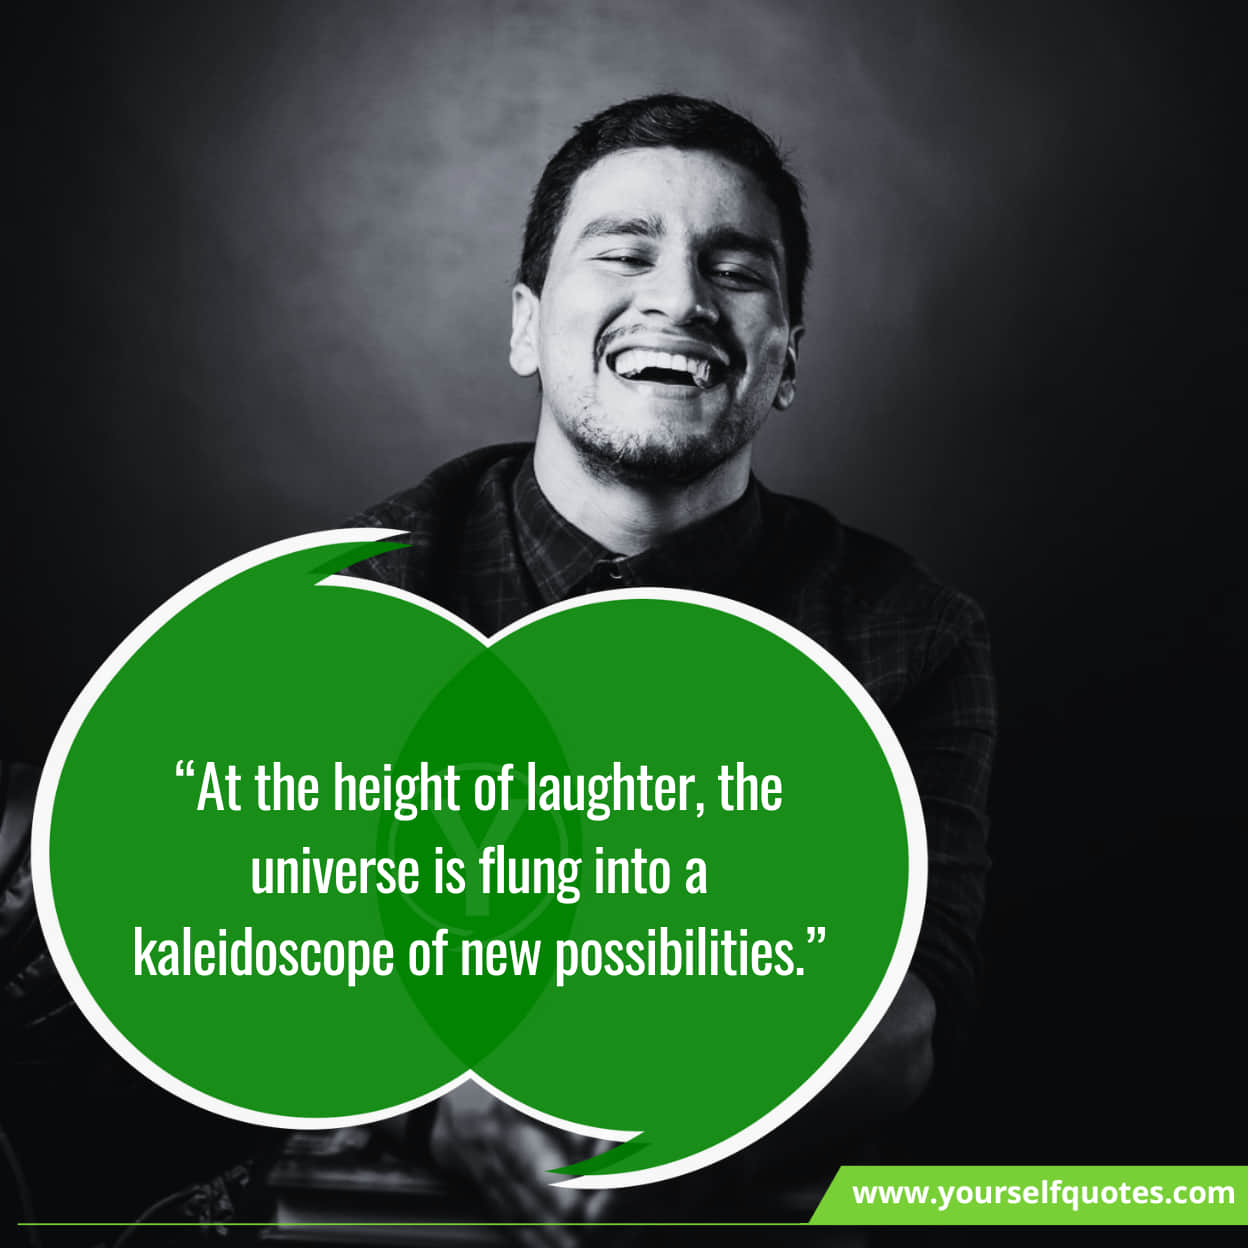 World Laughter Day Inspiring Quotes